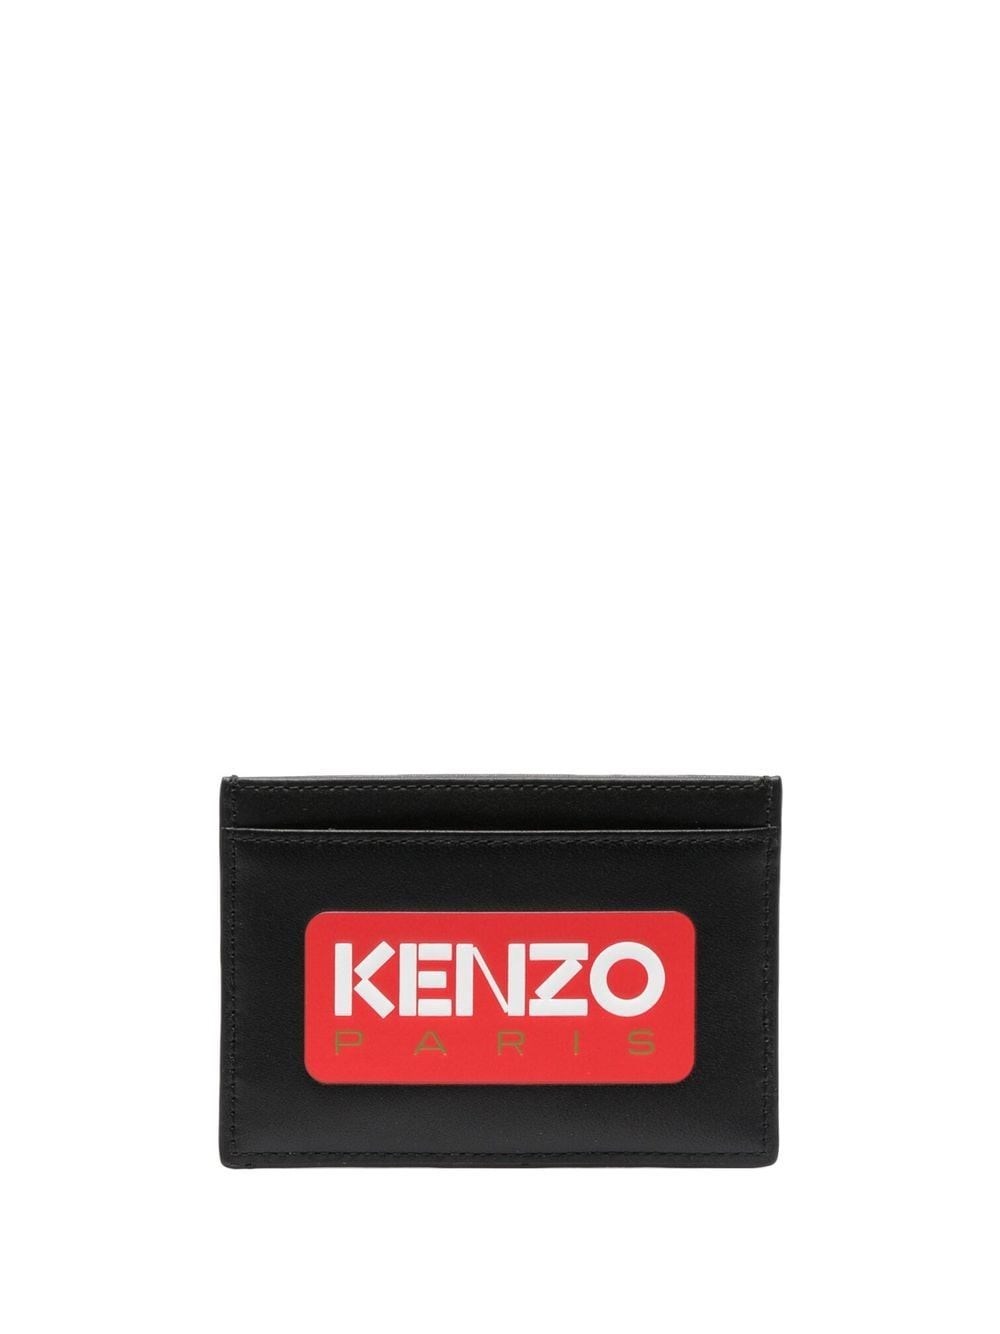 Kenzo Logo Leather Credit Card Case In Black